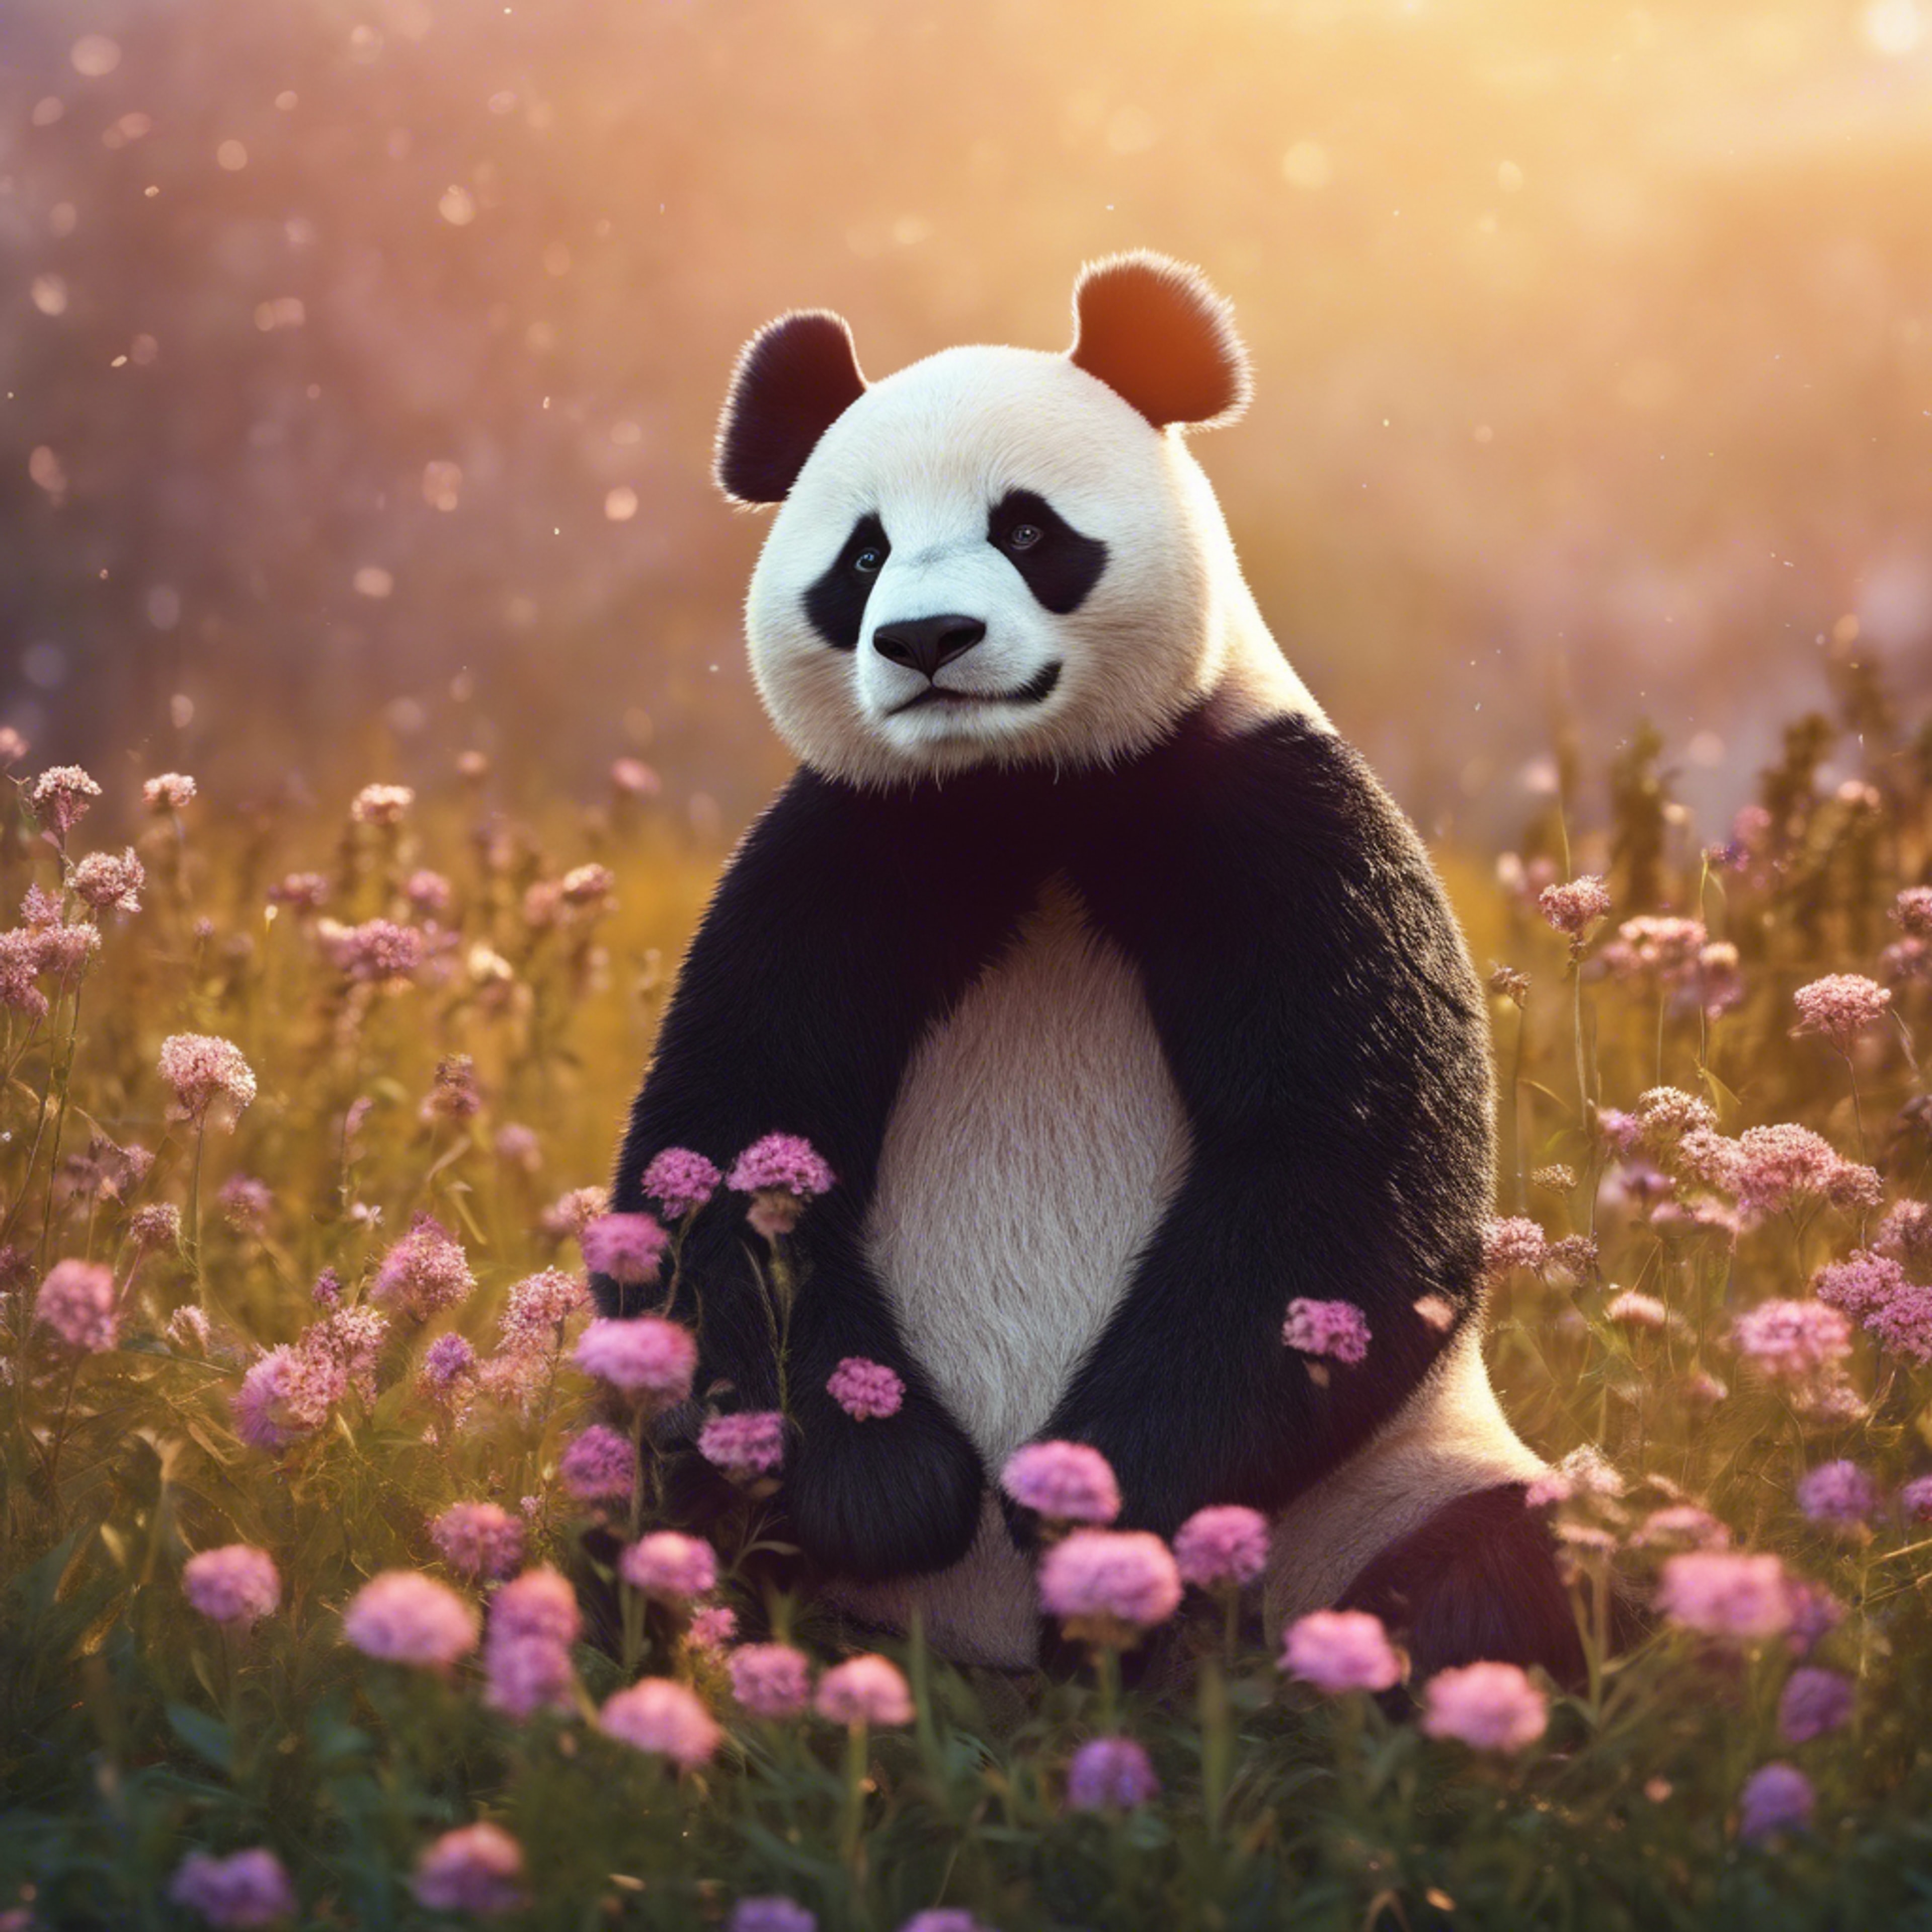 Beautiful illustration of a panda relaxing under the glow of the setting sun, surrounded by a field of wildflowers. Шпалери[4e88d1ee586942fa837d]